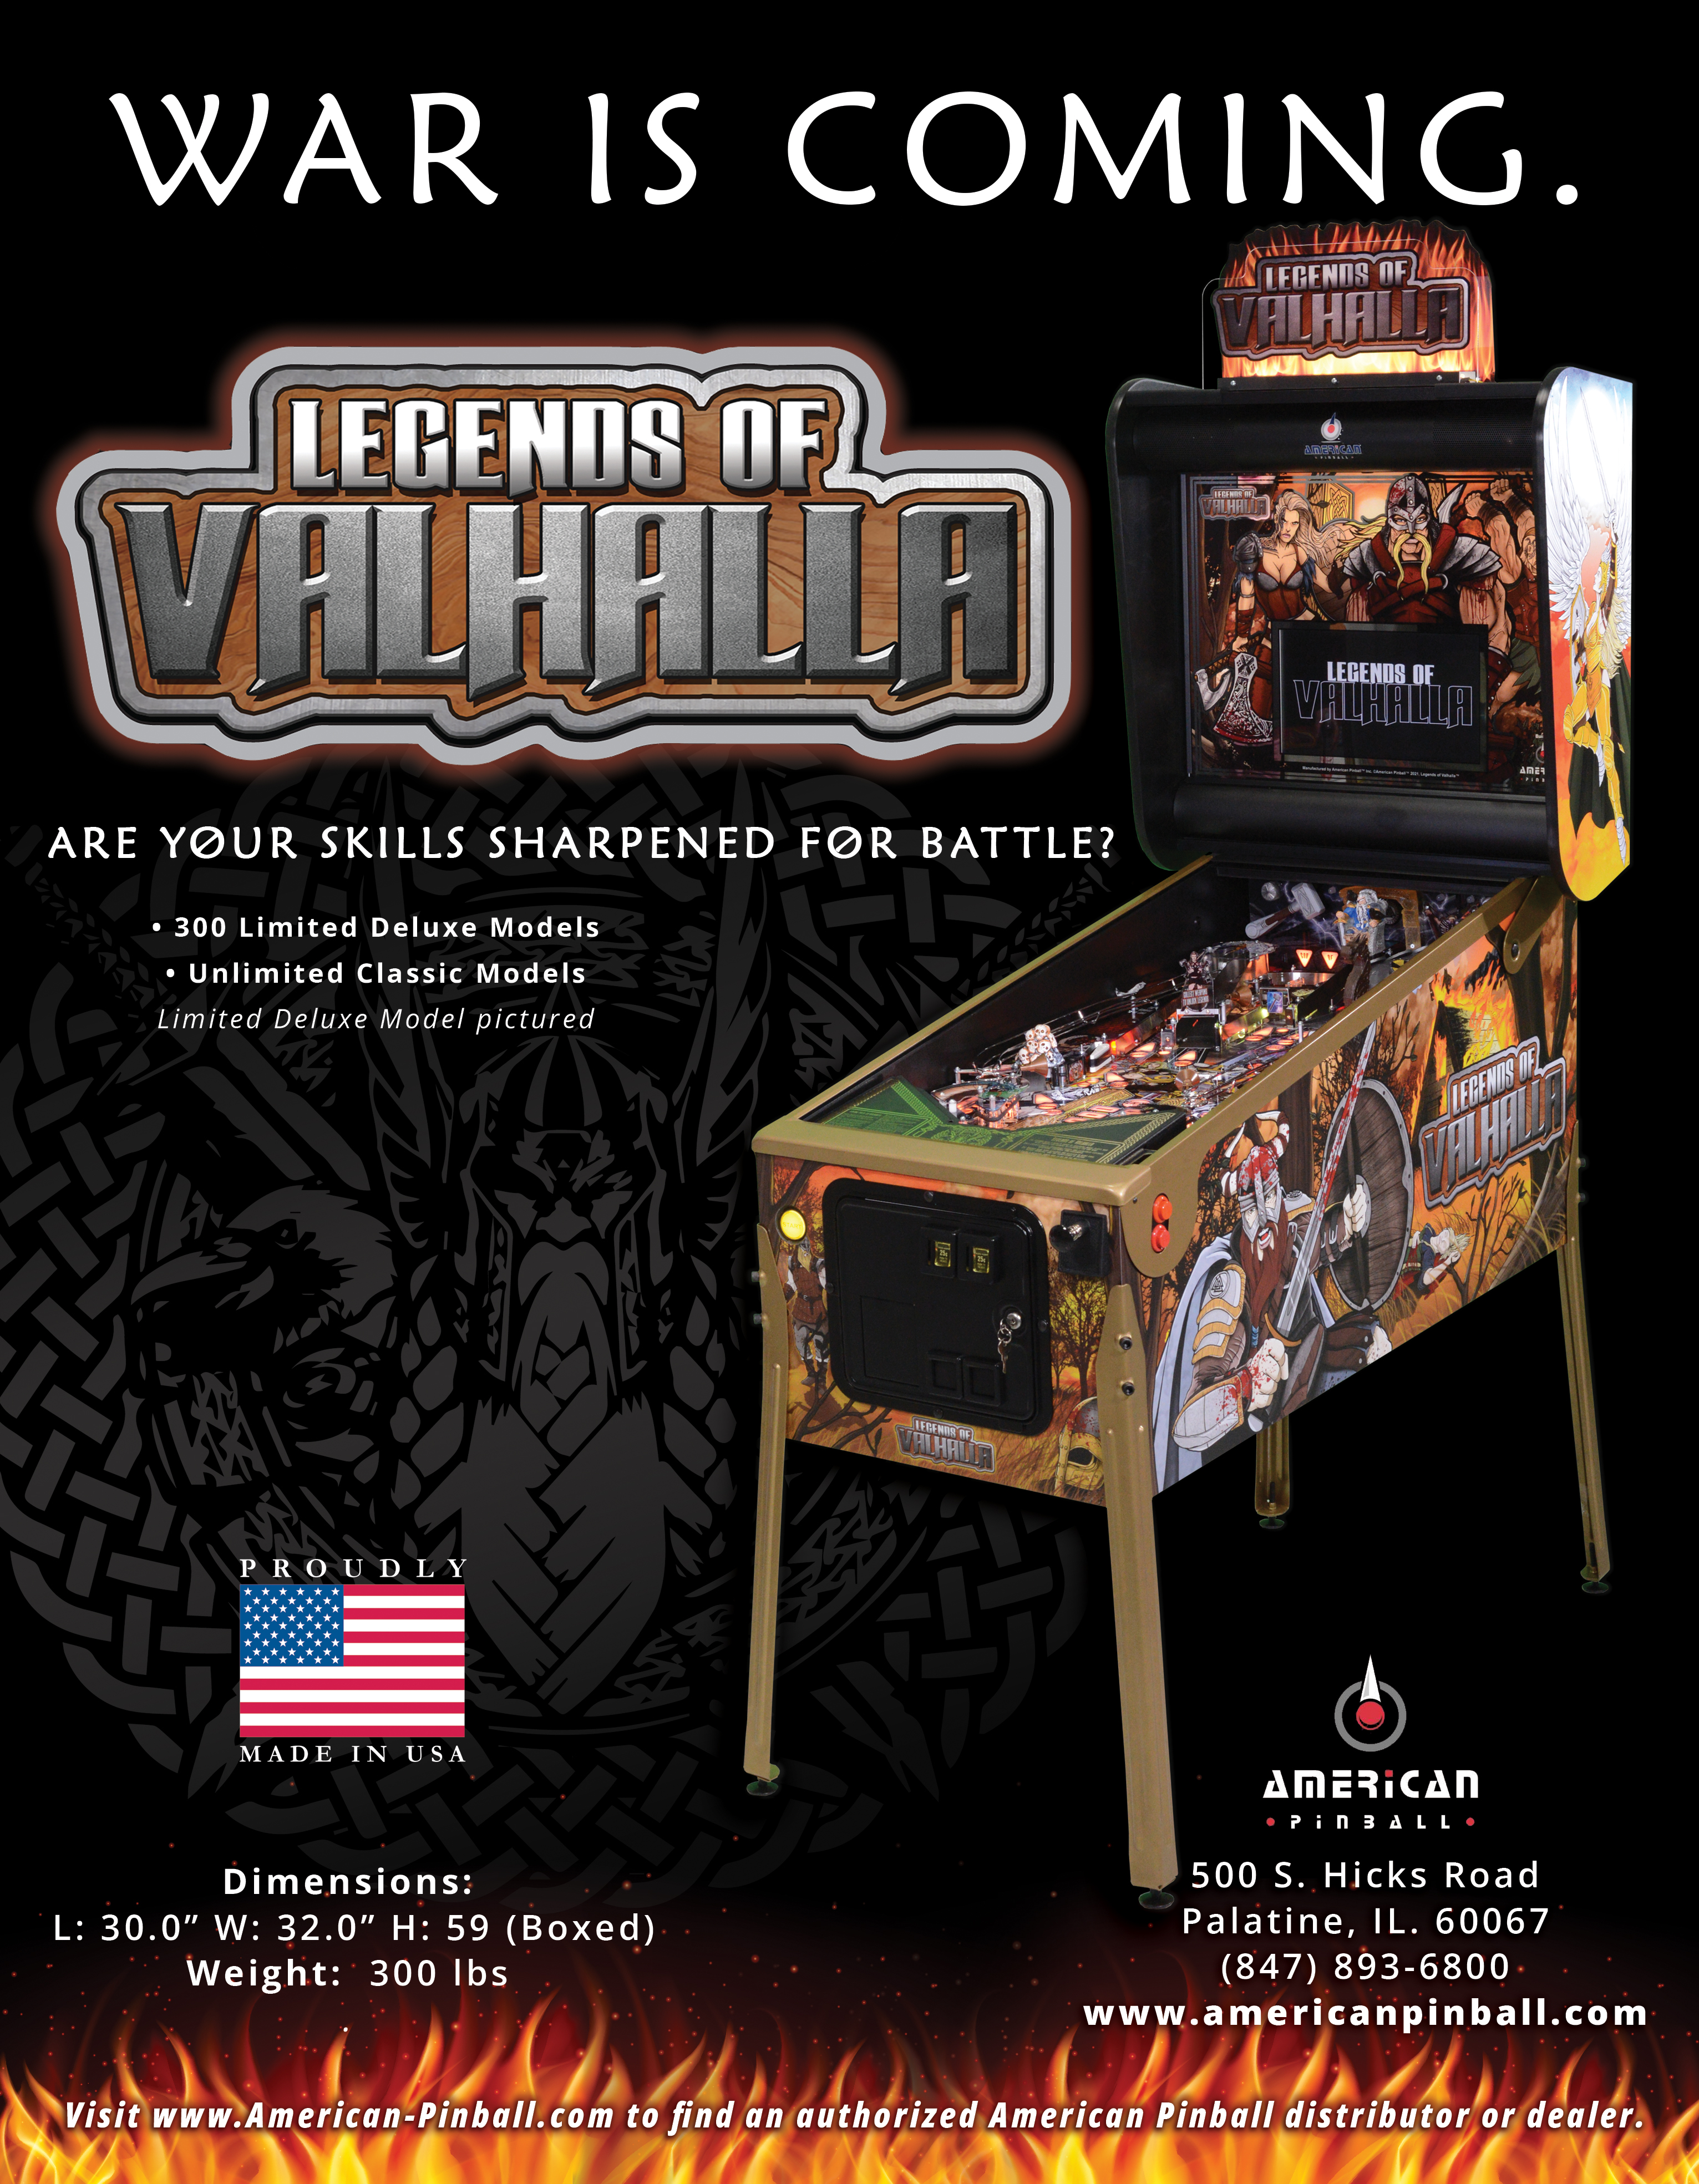 American Pinball Announces &apos;Legends of Valhalla&apos; by Riot Pinball